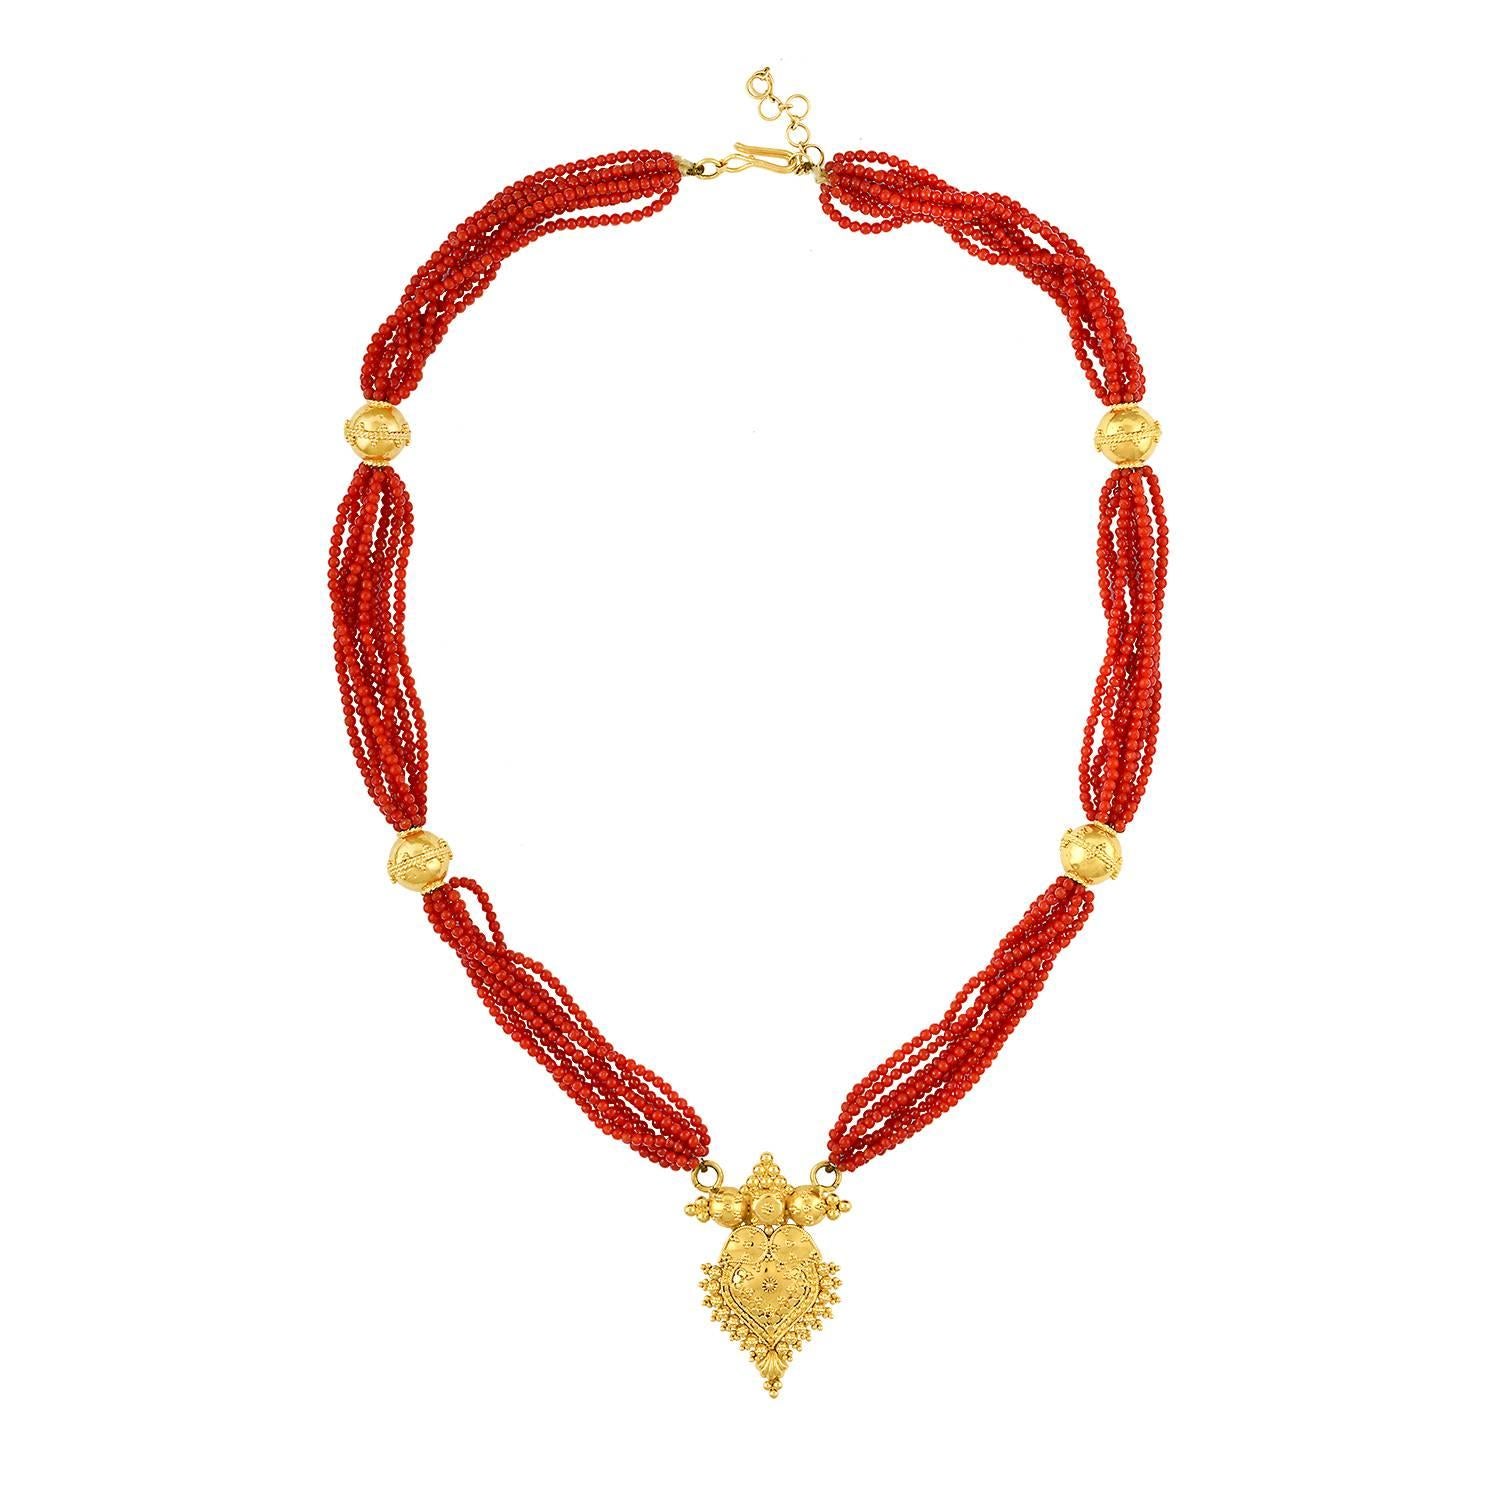 Multi-Strand Natural Coral Beads and Gold Necklace